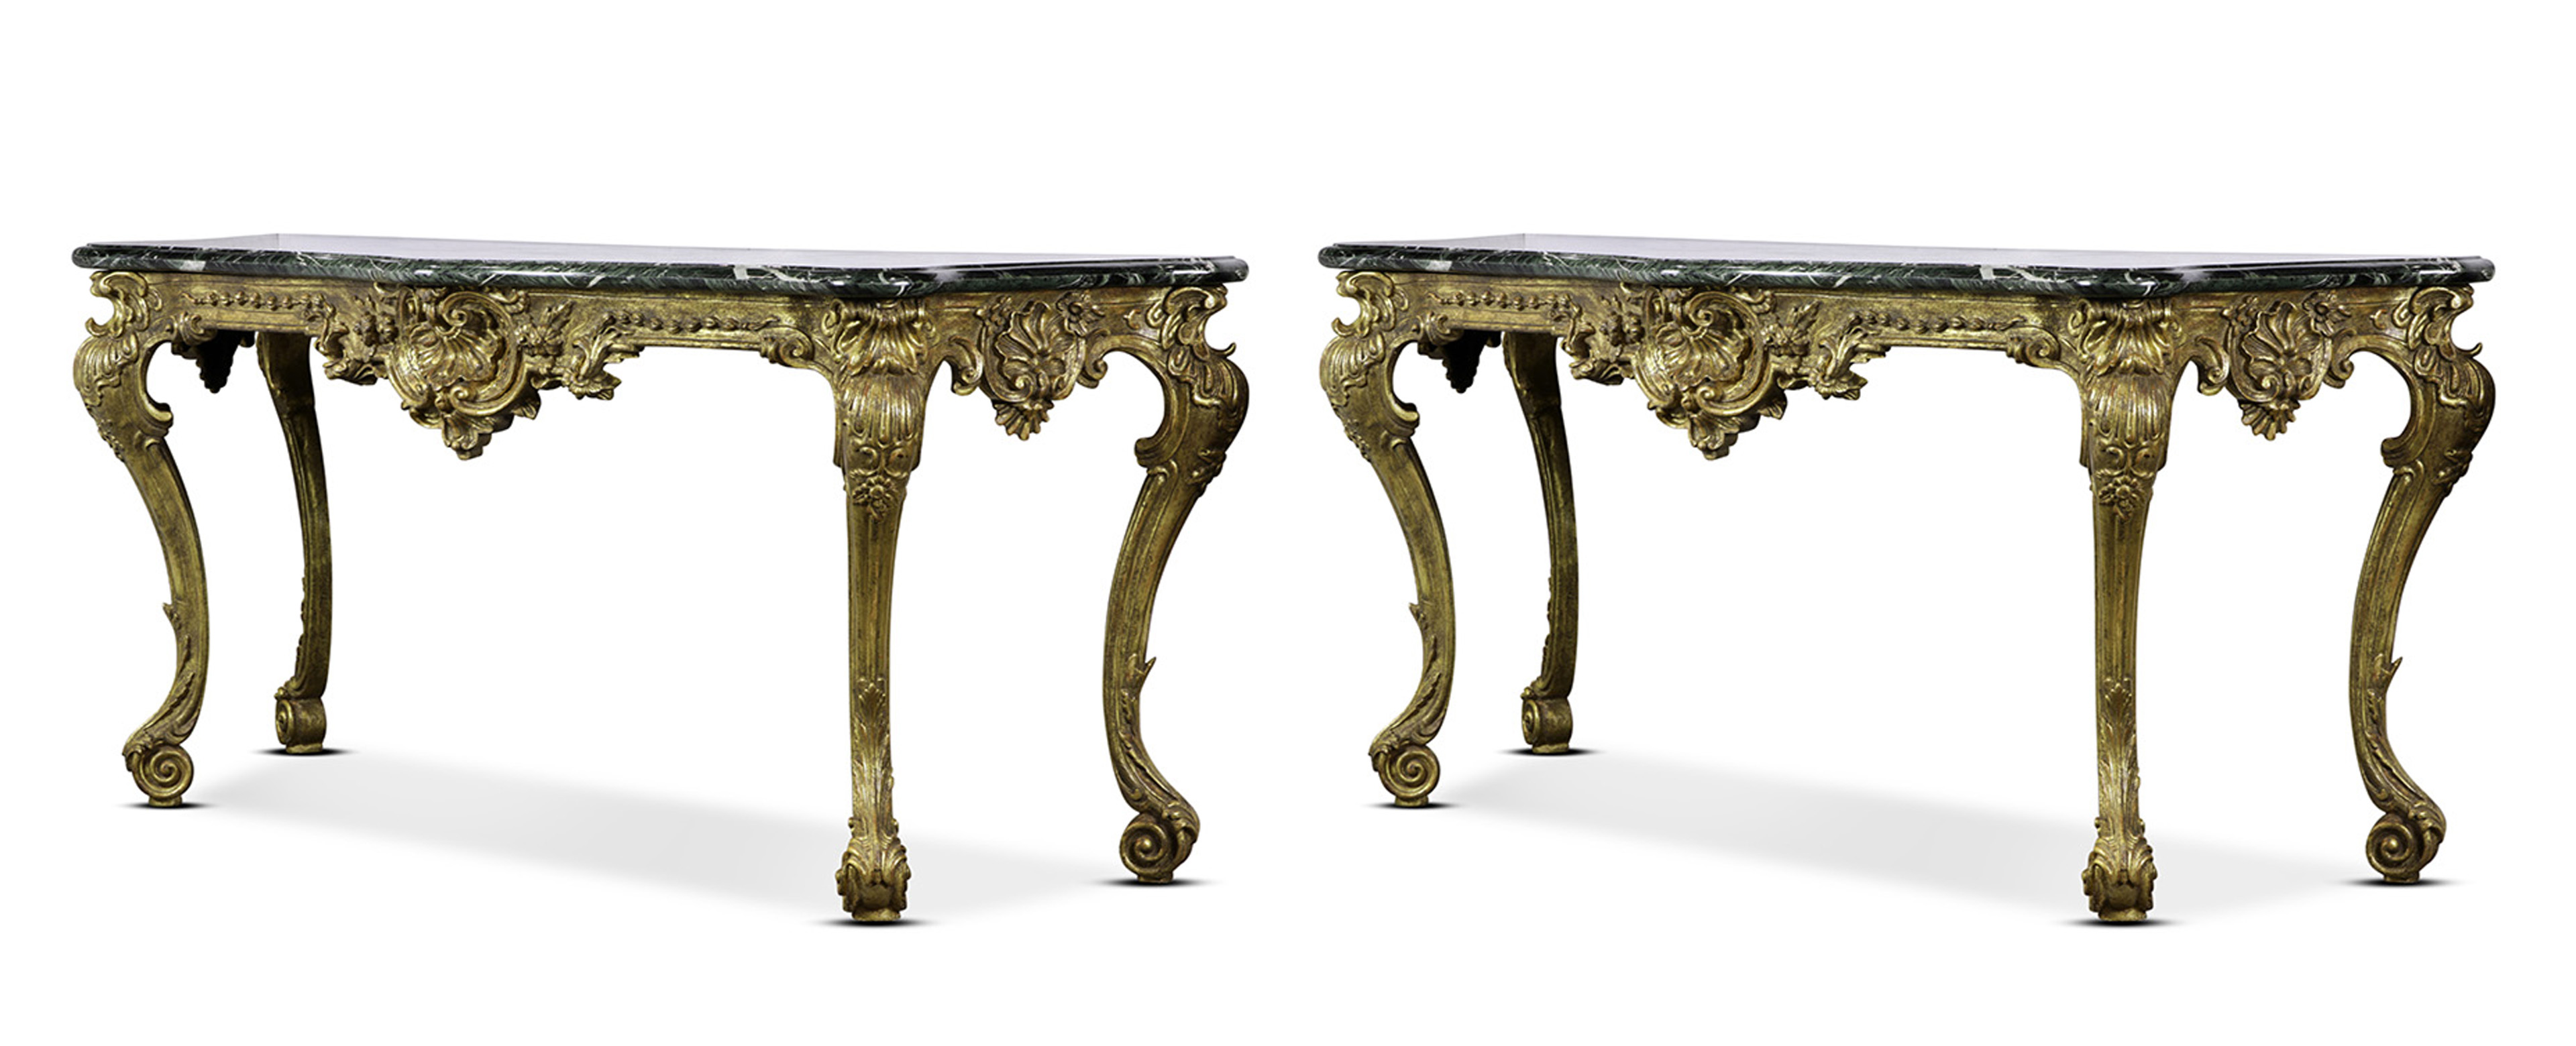 PAIR OF ROCOCO STYLE GILTWOOD CARVED